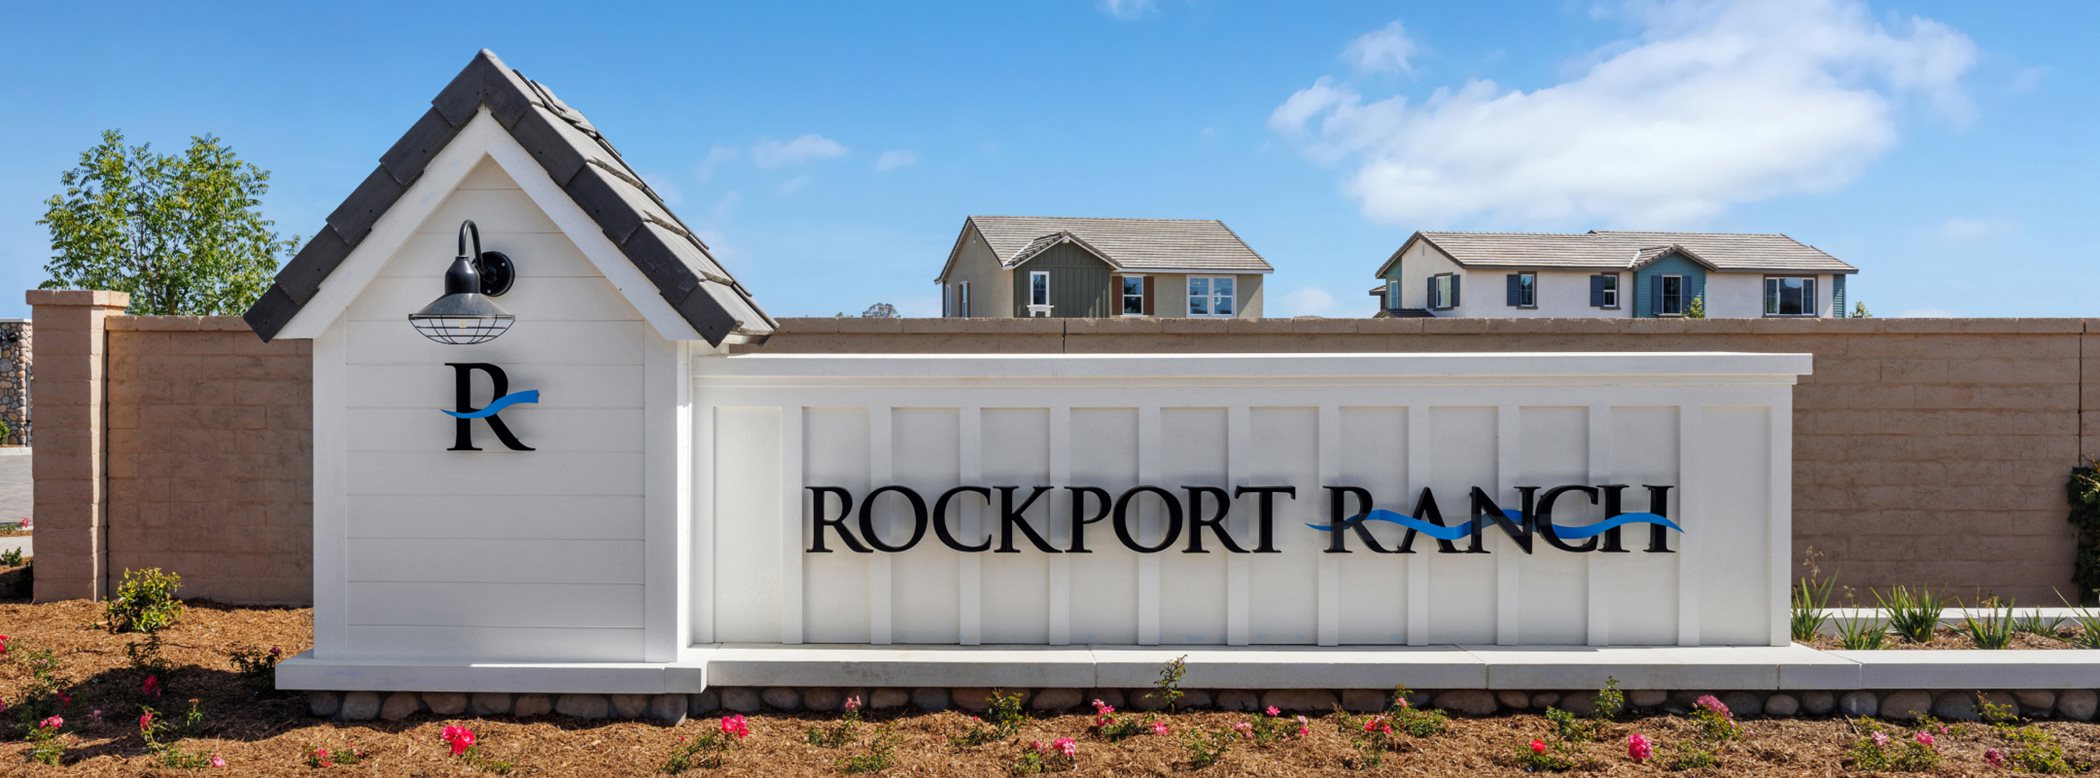 Rockport Ranch entry sign